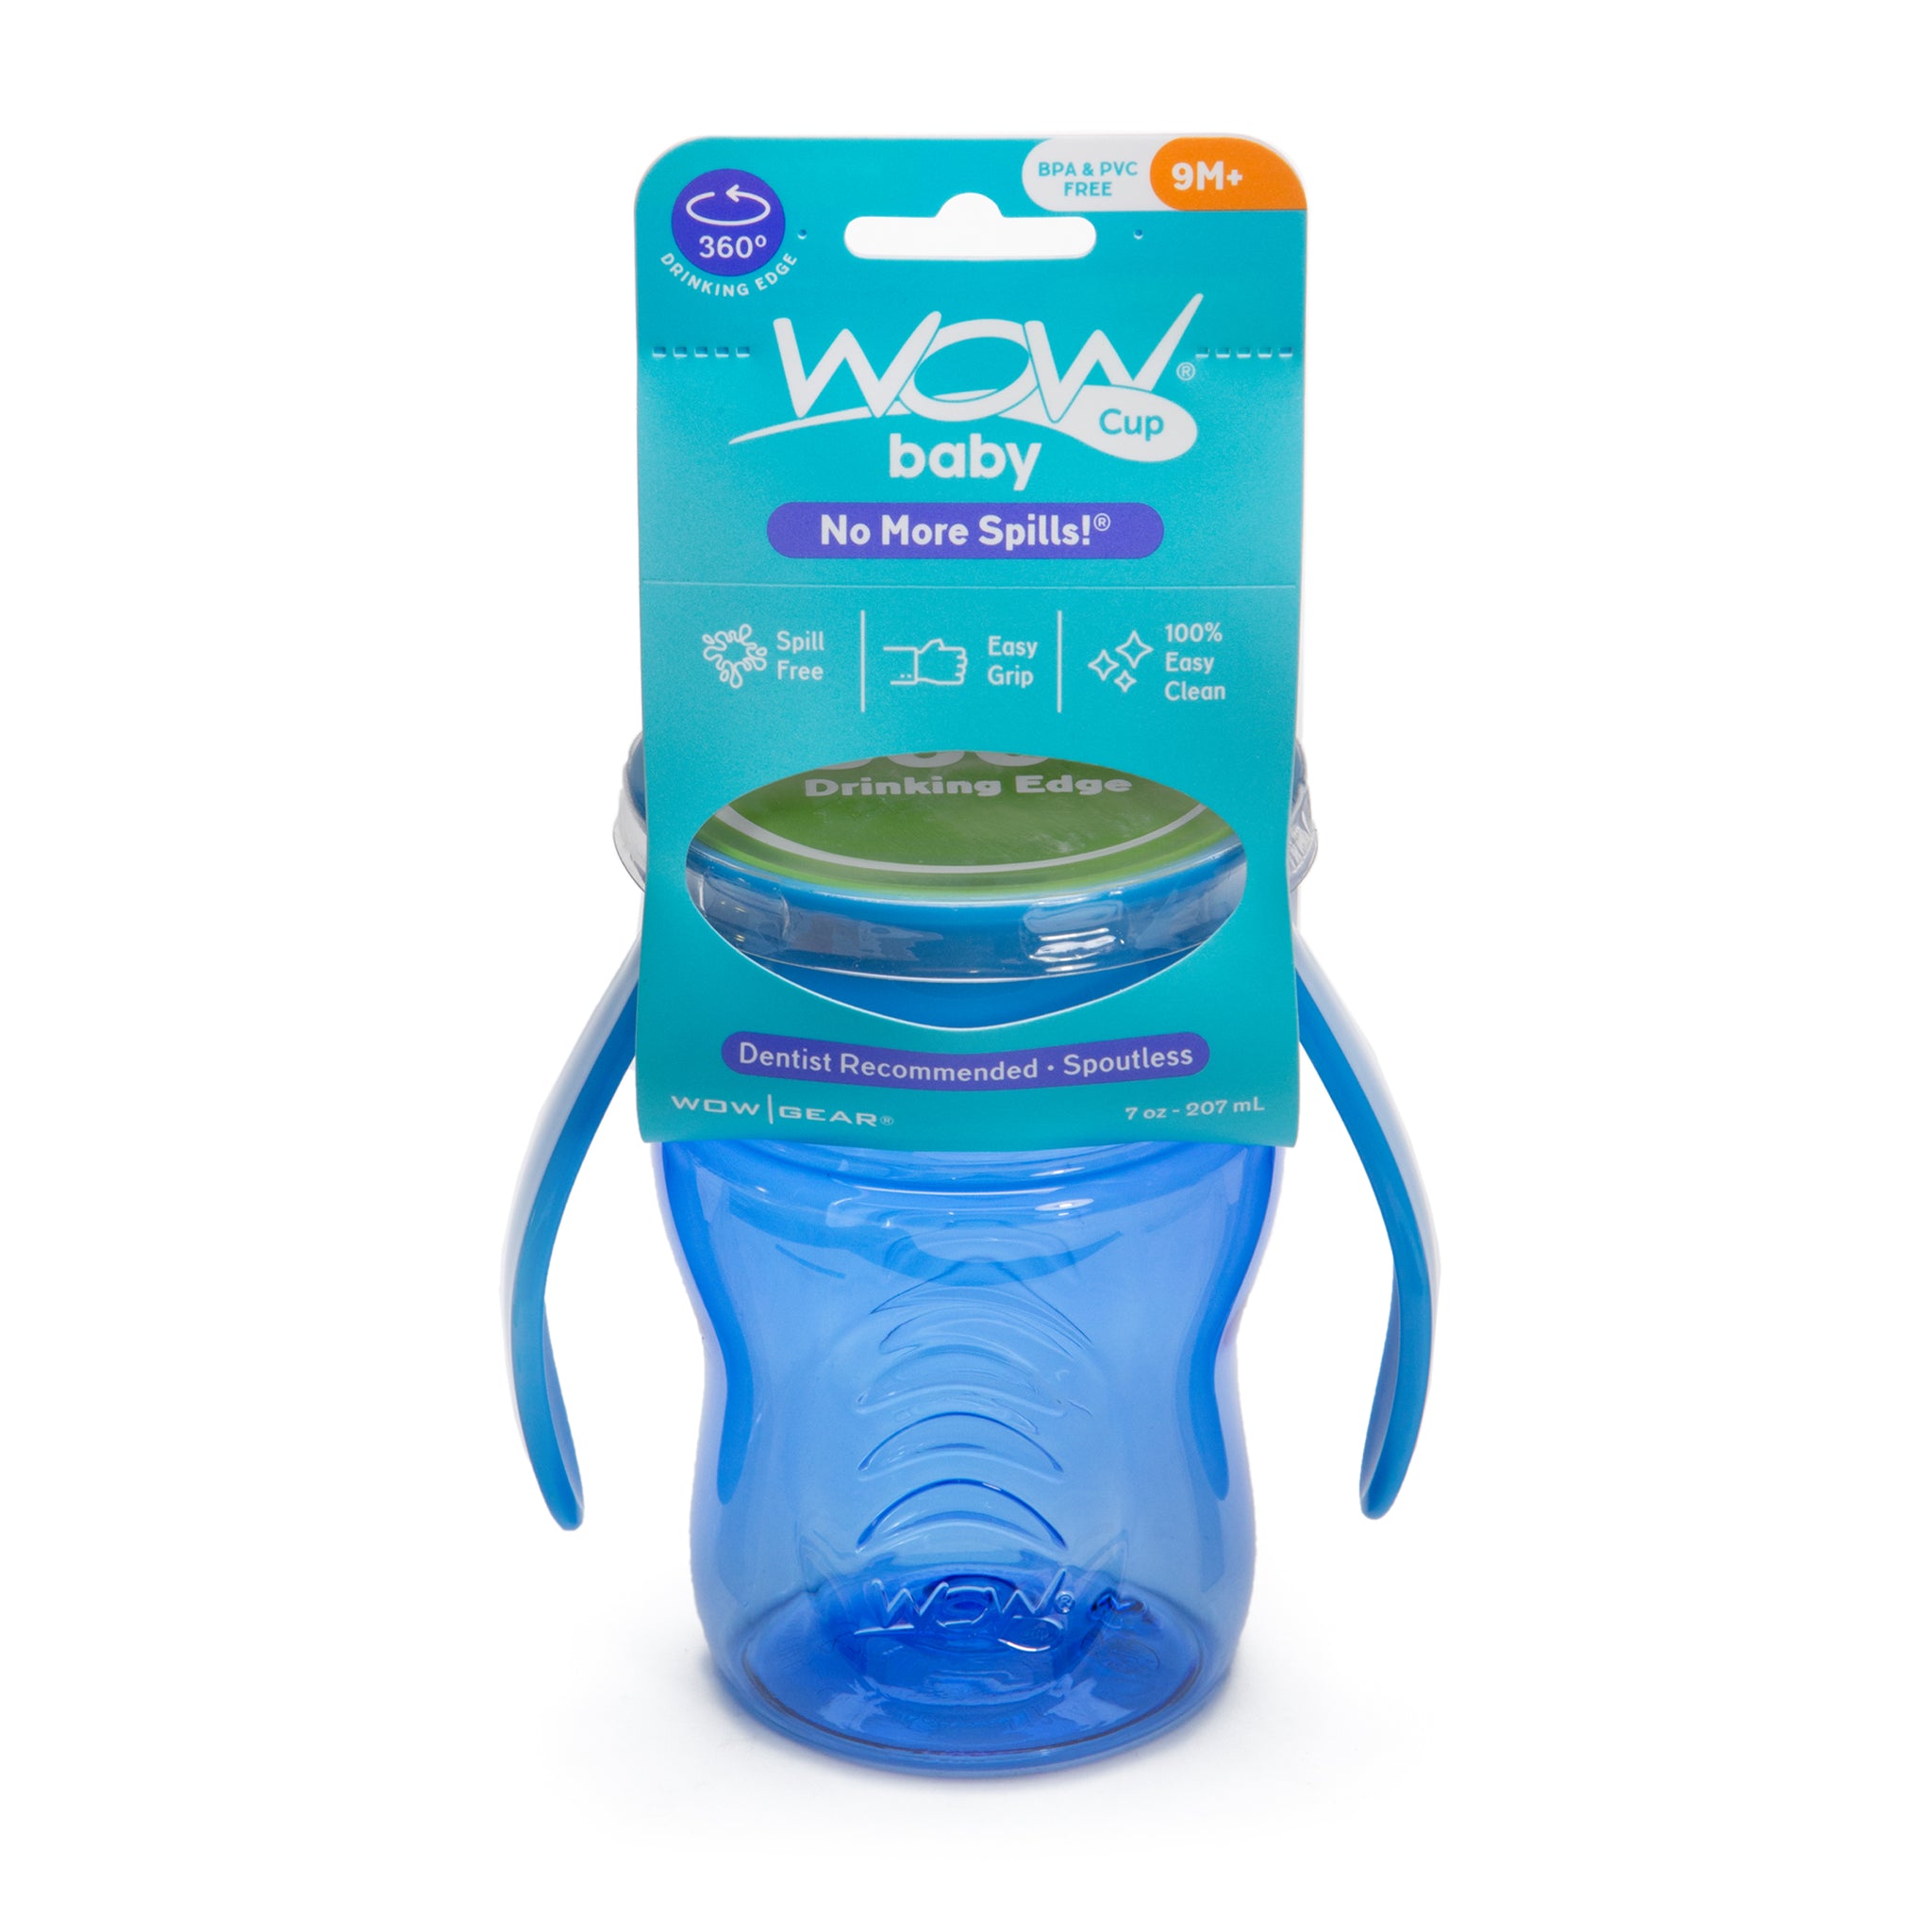 As seen on TV: Wow Cup spill free drinking cup review - The Gadgeteer